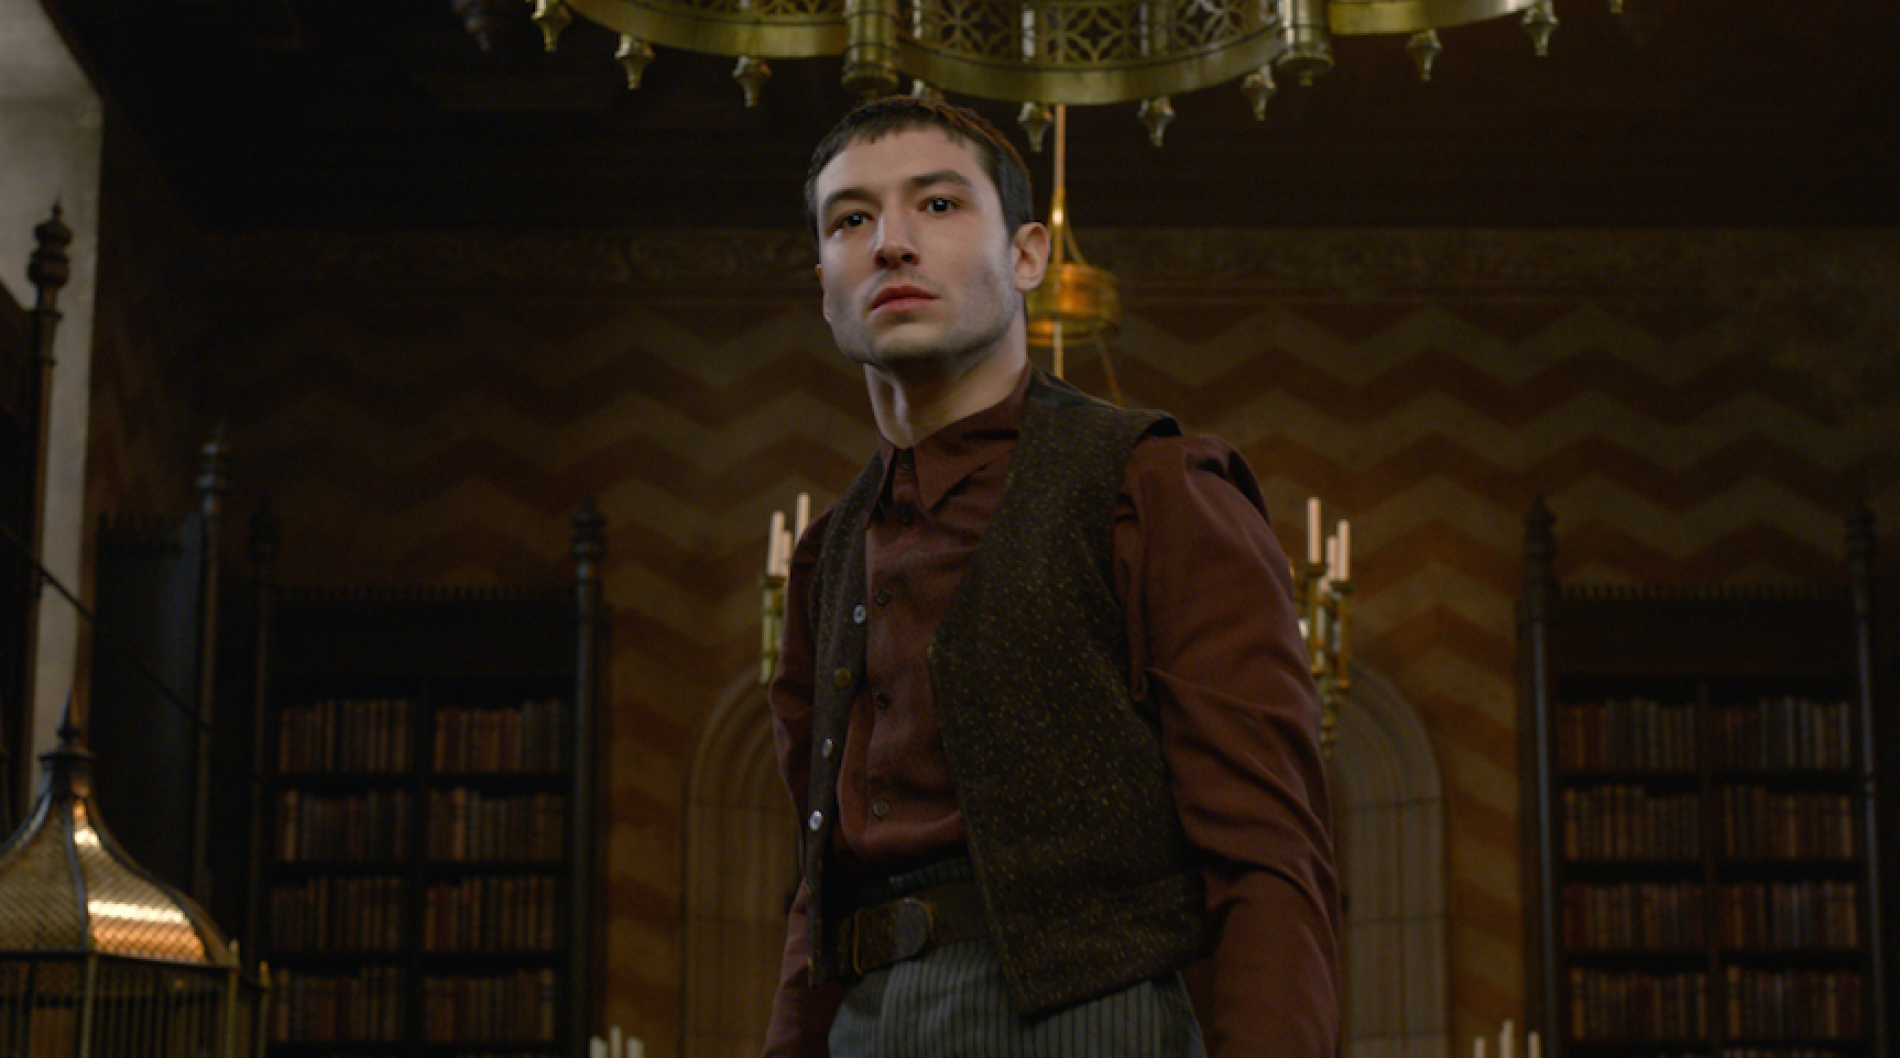 Ezra Miller Says His ‘Fantastic Beasts’ Storyline Is A “Vital” Metaphor For The LGBT Community